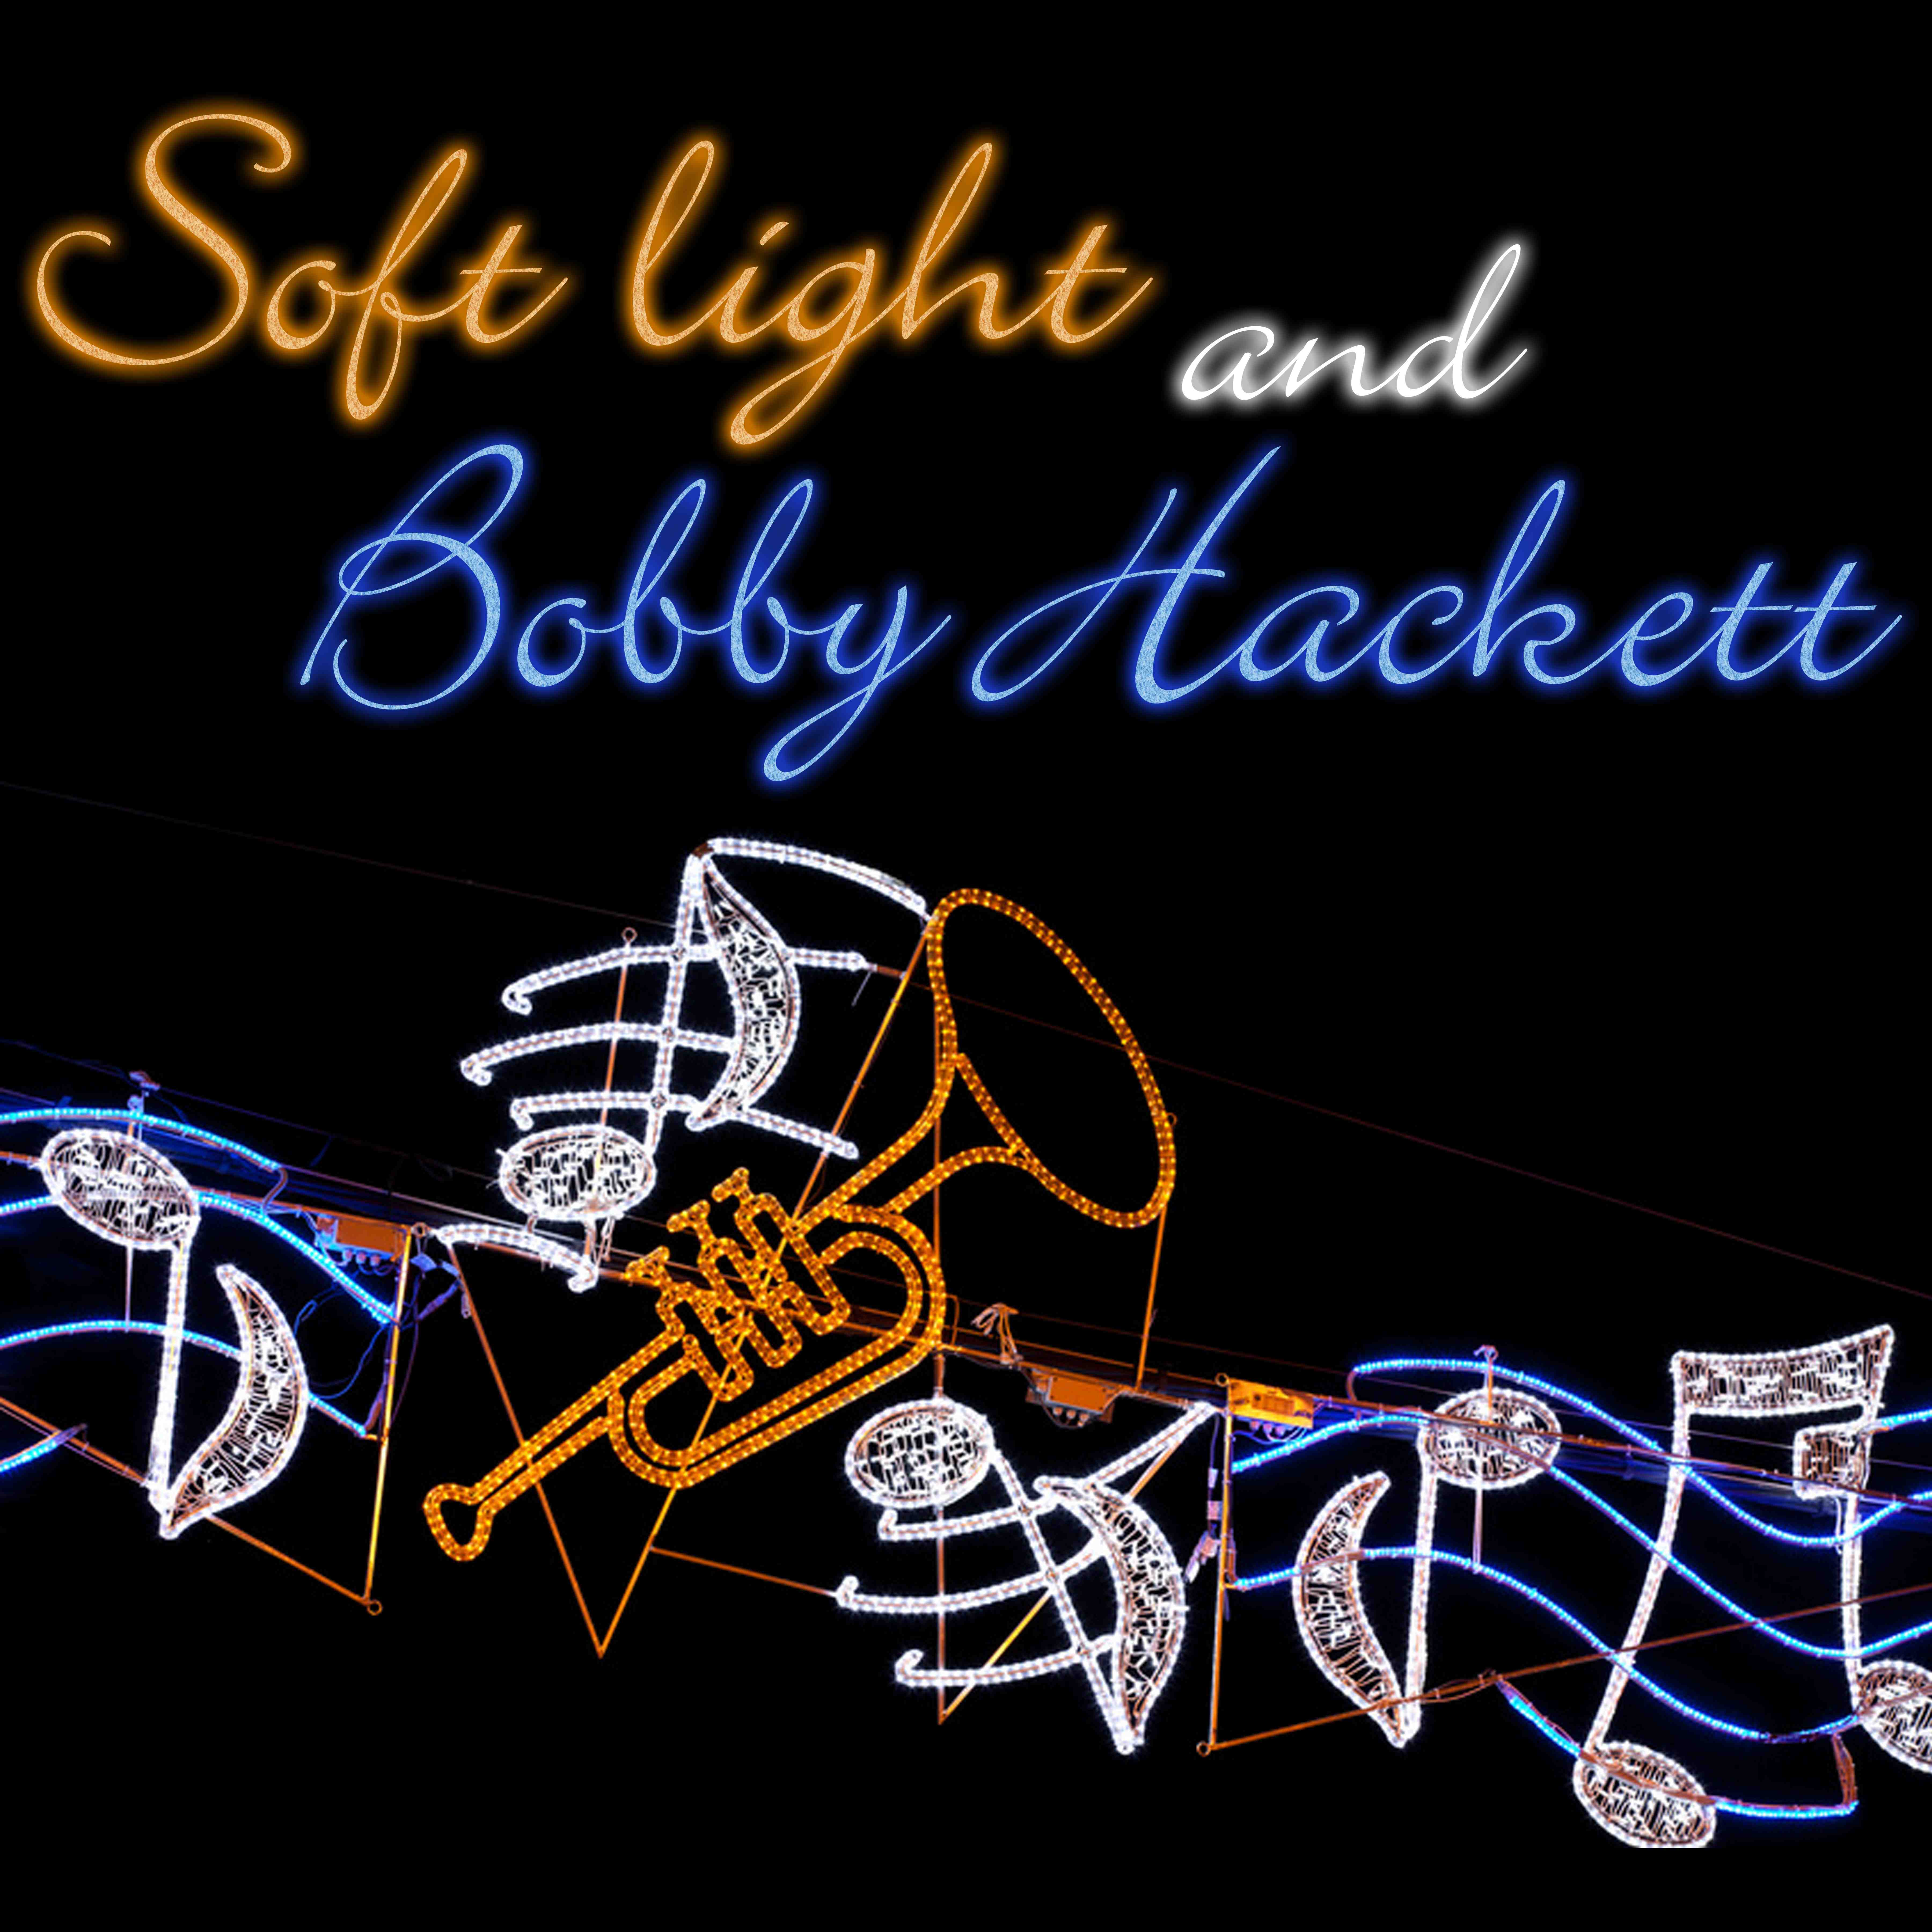 Soft Lights And Bobby Hackett (Expanded Edition)